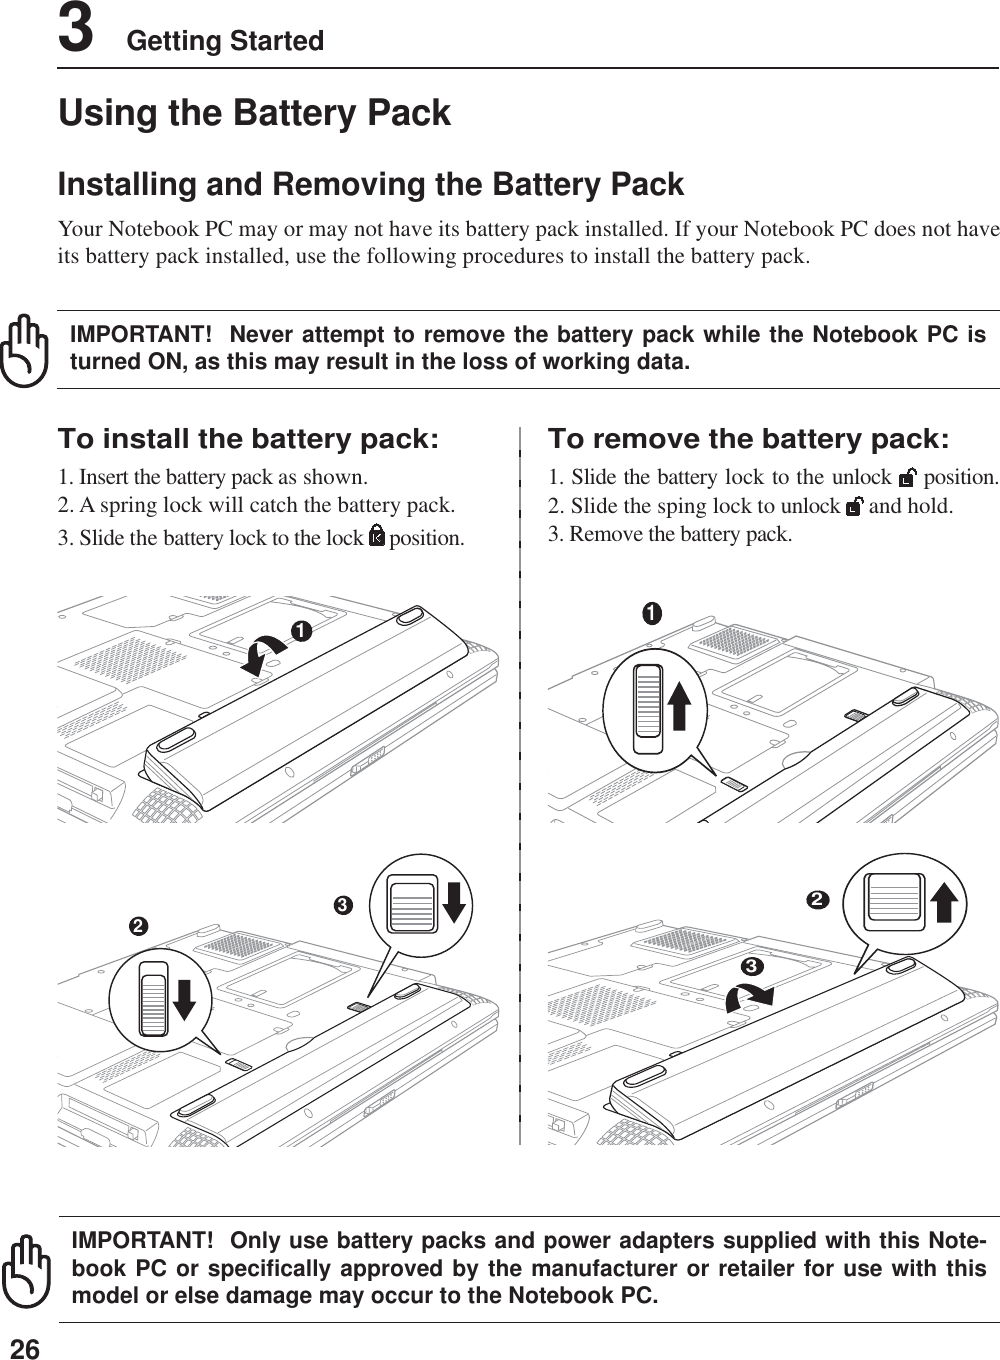 263    Getting StartedUsing the Battery PackInstalling and Removing the Battery PackYour Notebook PC may or may not have its battery pack installed. If your Notebook PC does not haveits battery pack installed, use the following procedures to install the battery pack.To install the battery pack:1. Insert the battery pack as shown.2. A spring lock will catch the battery pack.3. Slide the battery lock to the lock   position.To remove the battery pack:1. Slide the battery lock to the unlock   position.2. Slide the sping lock to unlock   and hold.3. Remove the battery pack.IMPORTANT!  Never attempt to remove the battery pack while the Notebook PC isturned ON, as this may result in the loss of working data.IMPORTANT!  Only use battery packs and power adapters supplied with this Note-book PC or specifically approved by the manufacturer or retailer for use with thismodel or else damage may occur to the Notebook PC.132132